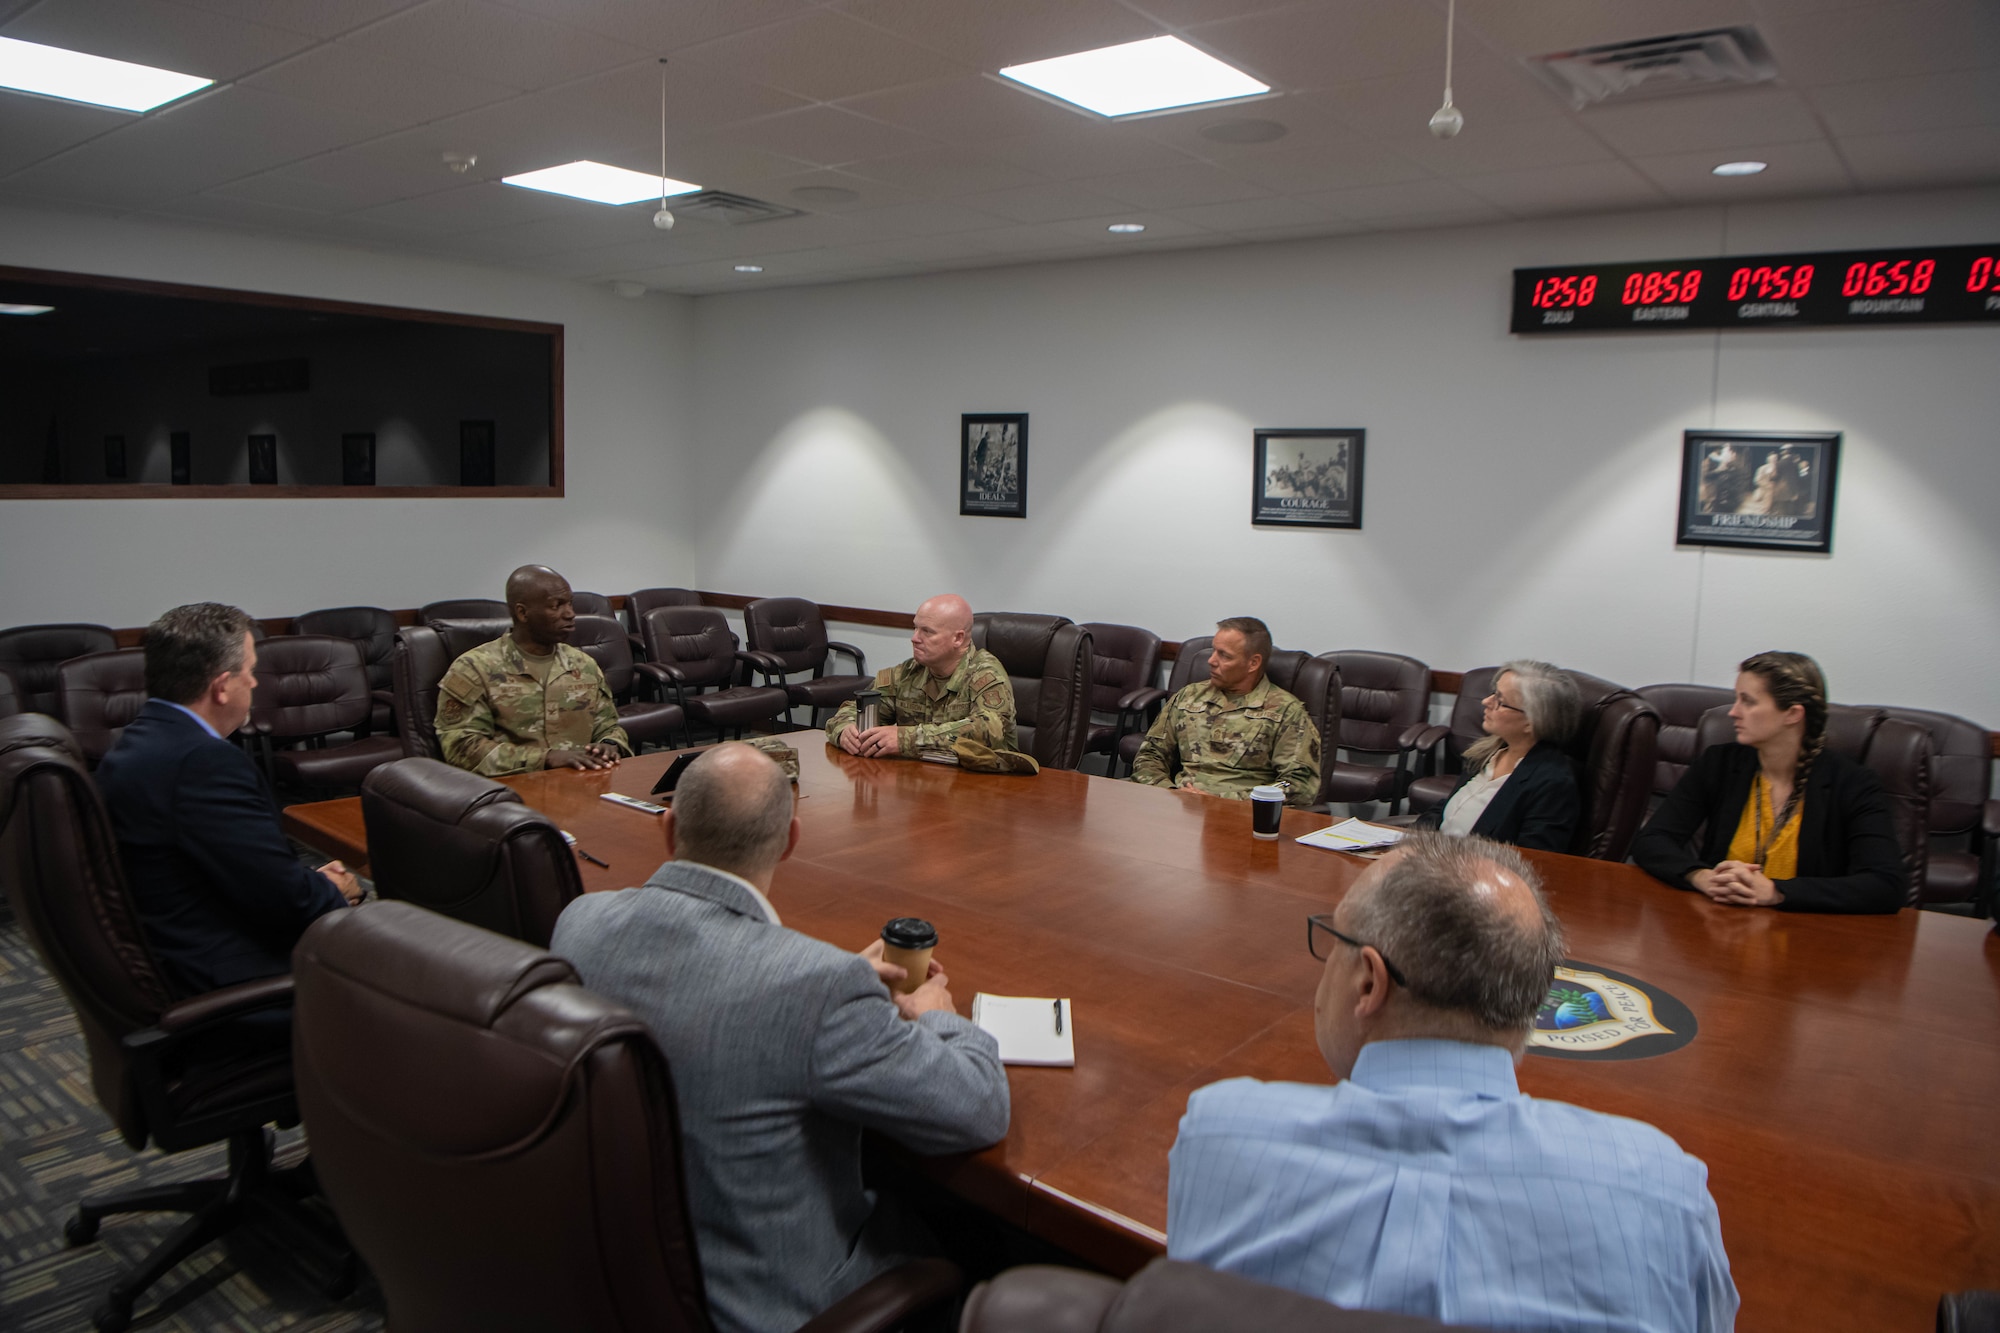 Leadership from the Defense Logistics Agency in Virginia receives a briefing by Col. Kenneth McGhee, 91st Missile Wing commander and Chief Master Sgt. Ernest Crider, 91st MW command chief at Minot Air Force Base, North Dakota, July 19, 2023. DLA is the Defense Department’s combat support agency for worldwide logistics, which provides food, medical material, uniforms and construction equipment. (U.S. Air Force photo by Airman 1st Class Kyle Wilson)